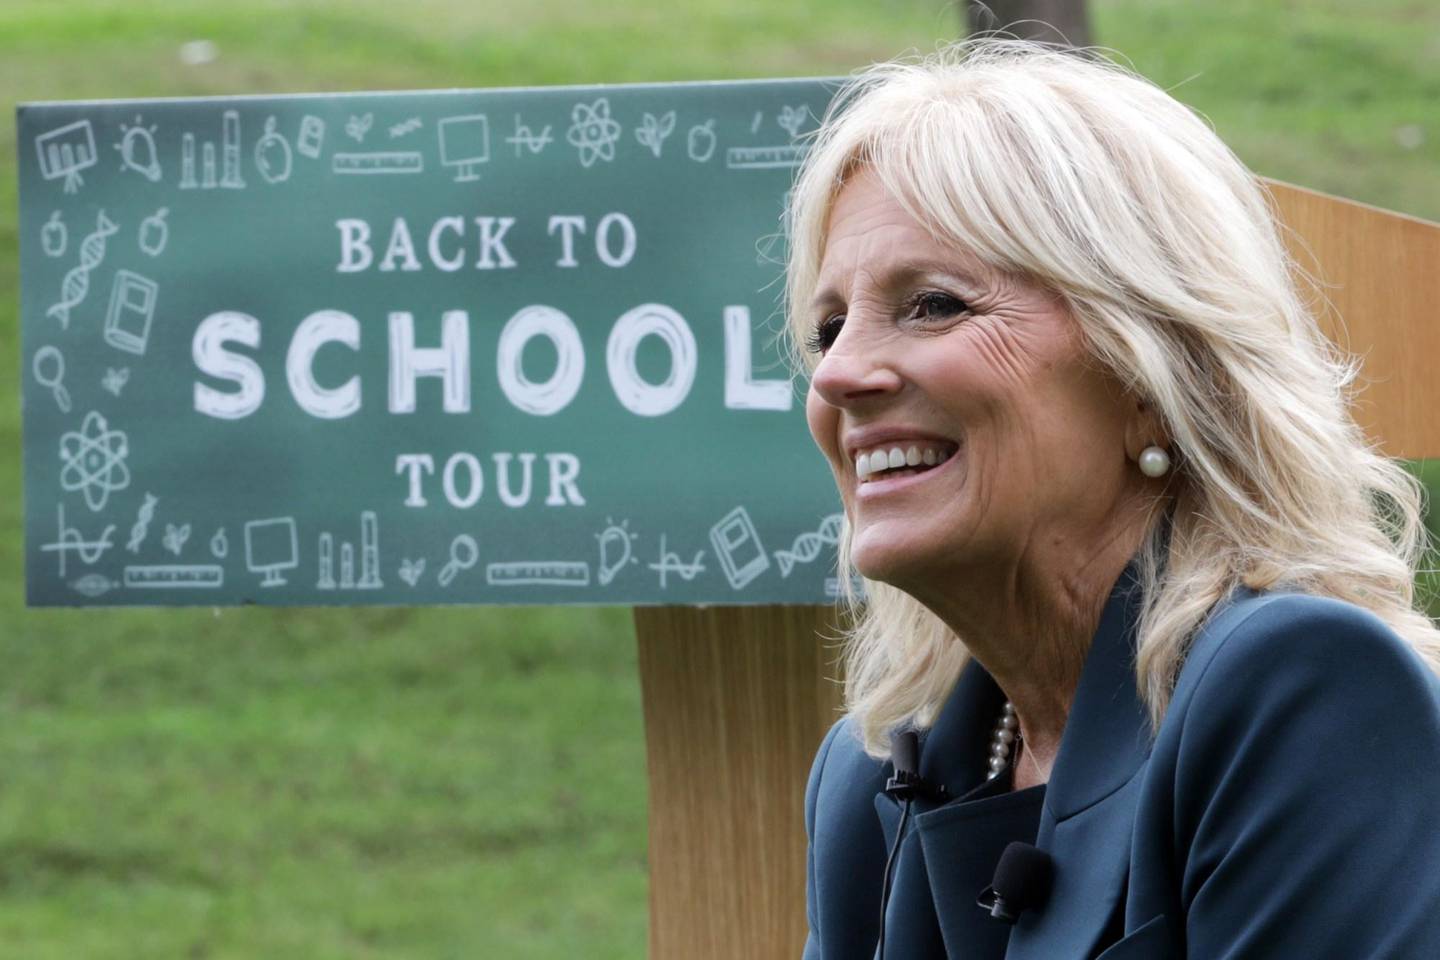 WILMINGTON, DELAWARE - SEPTEMBER 01: Dr. Jill Biden, wife of Democratic presidential candidate former Vice President Joe Biden, speaks during a visit at Evan G. Shortlidge Academy on September 1, 2020 in Wilmington, Delaware. Dr. Biden visited the school and took part in conversations with educators on safely reopening schools.   Alex Wong/Getty Images/AFP
== FOR NEWSPAPERS, INTERNET, TELCOS & TELEVISION USE ONLY ==